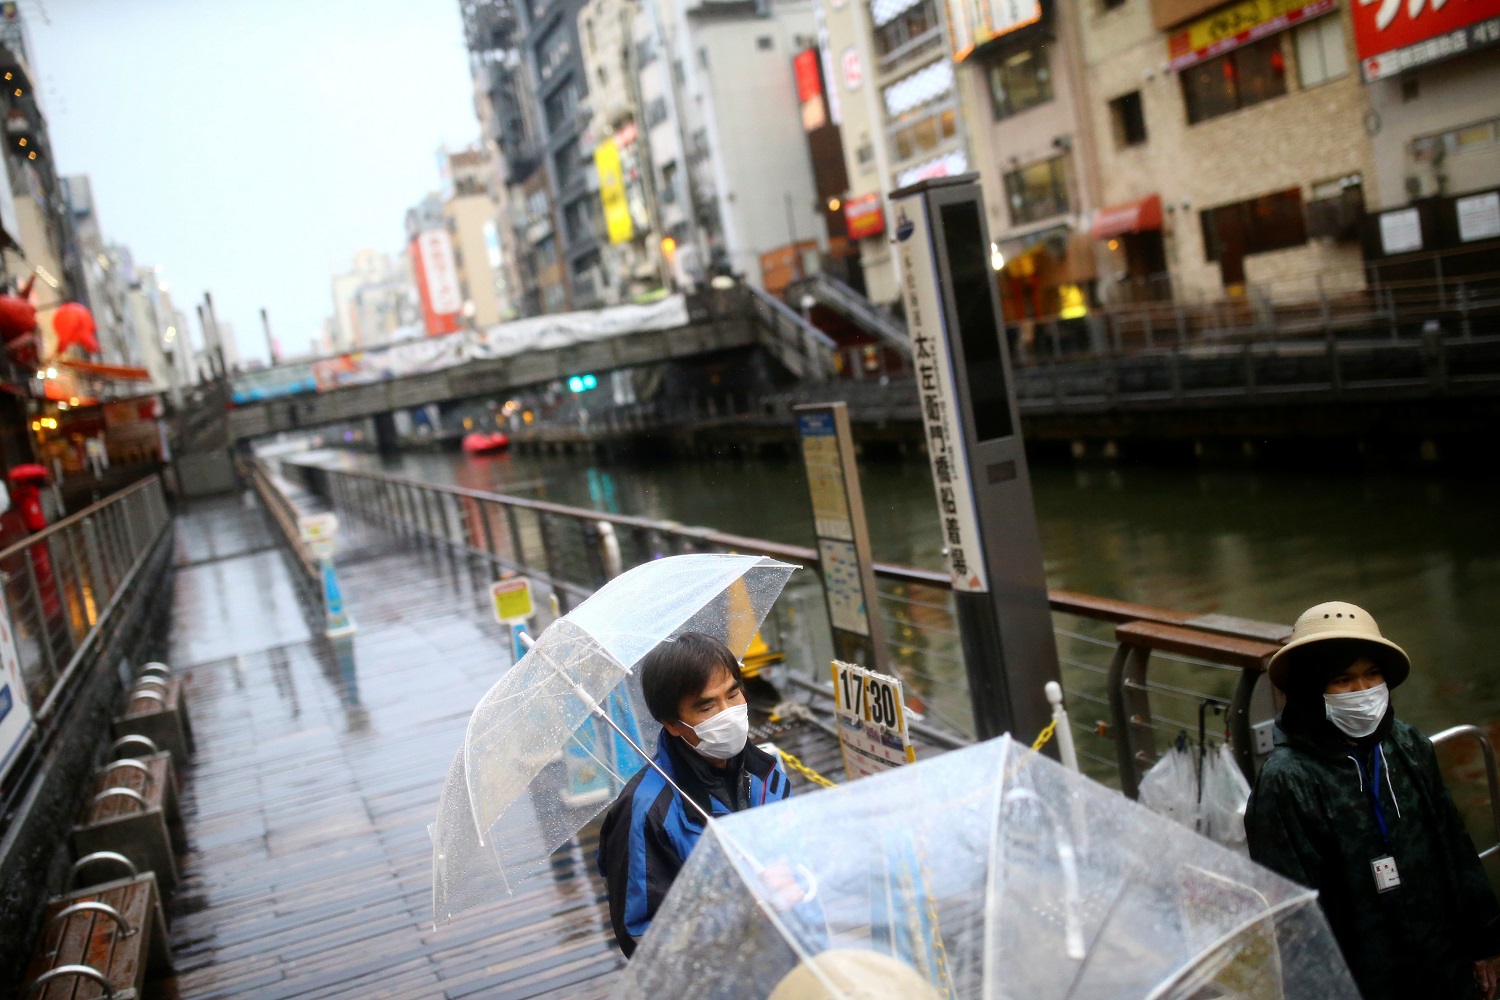 Workers, wearing protective masks following an outbreak of the coronavirus disease (COVID-19), receive tourists on an almost empty port in the Dotonbori entertainment district of Osaka